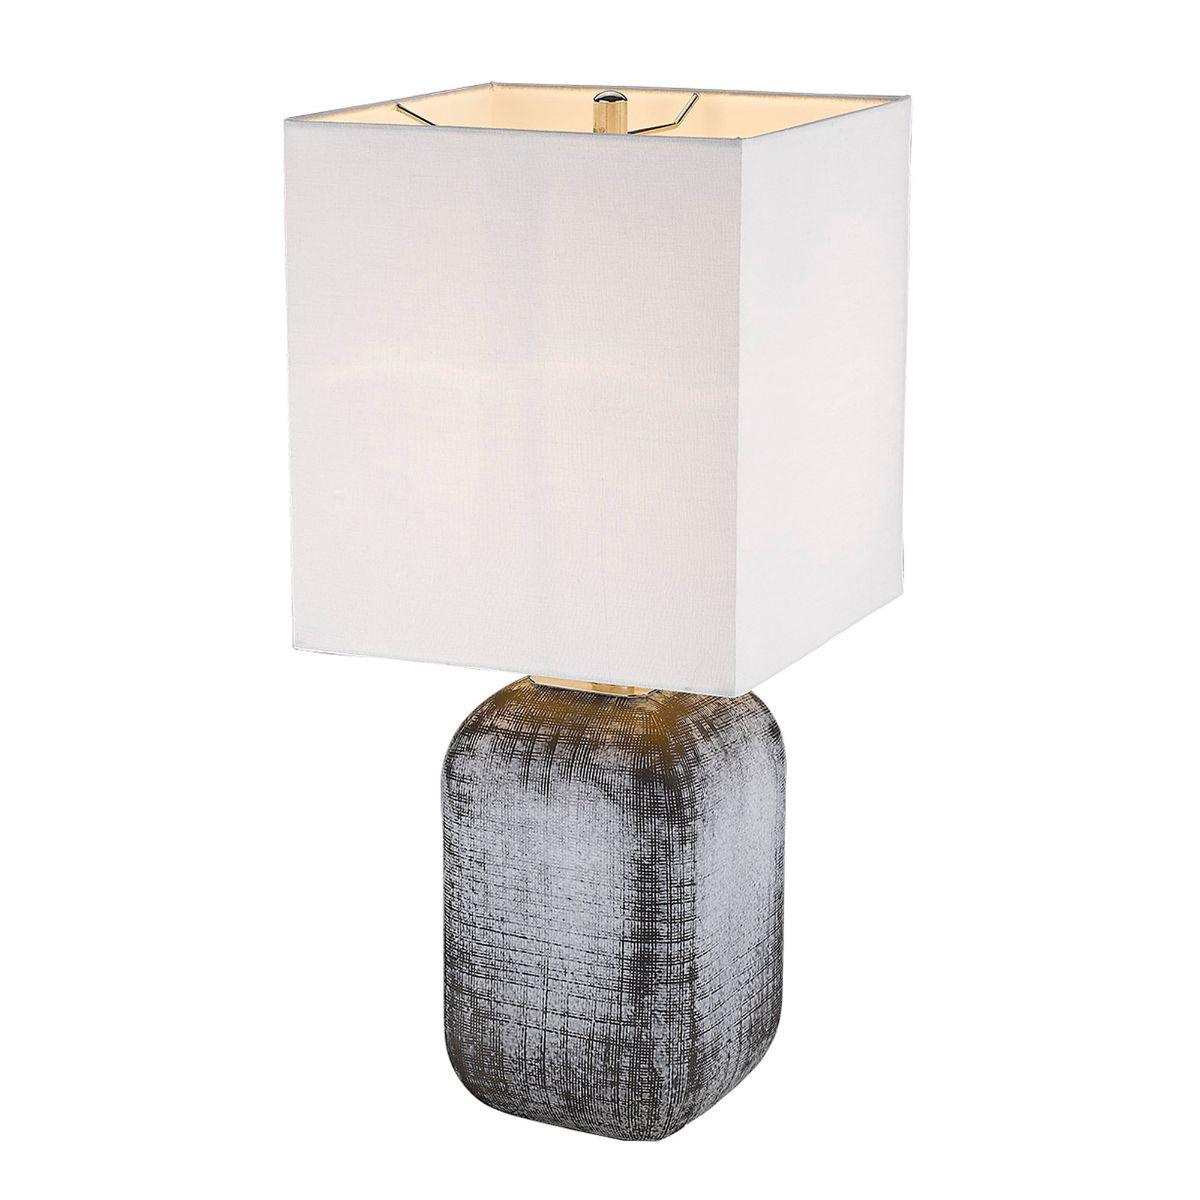 Trend Home 1 Light Table Lamp Blue/Gray Glass Body and Polished Nickel Accents